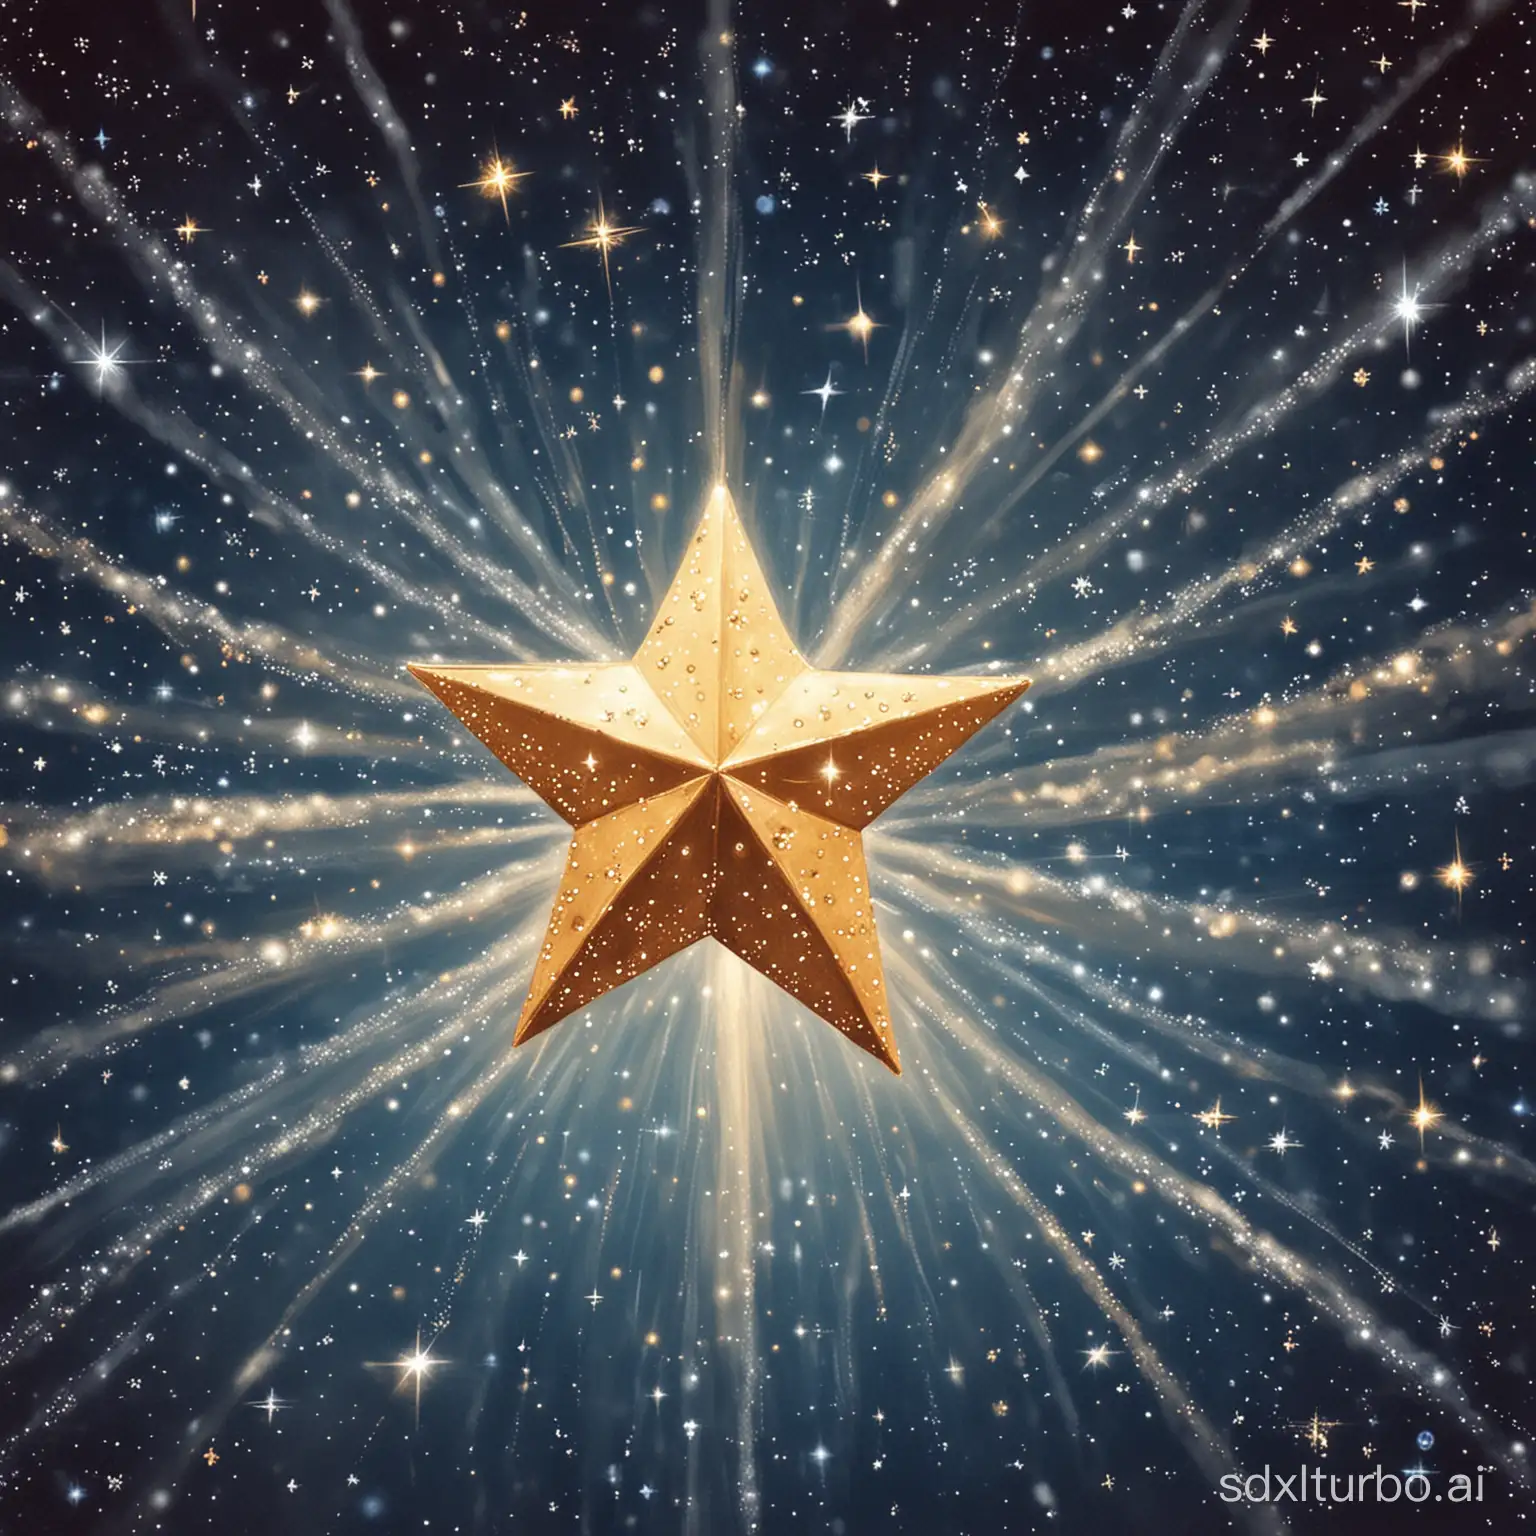 Twinkle, twinkle, little star,
 How I wonder what you are,
 Up above the world so high,
 Like a diamond in the sky.